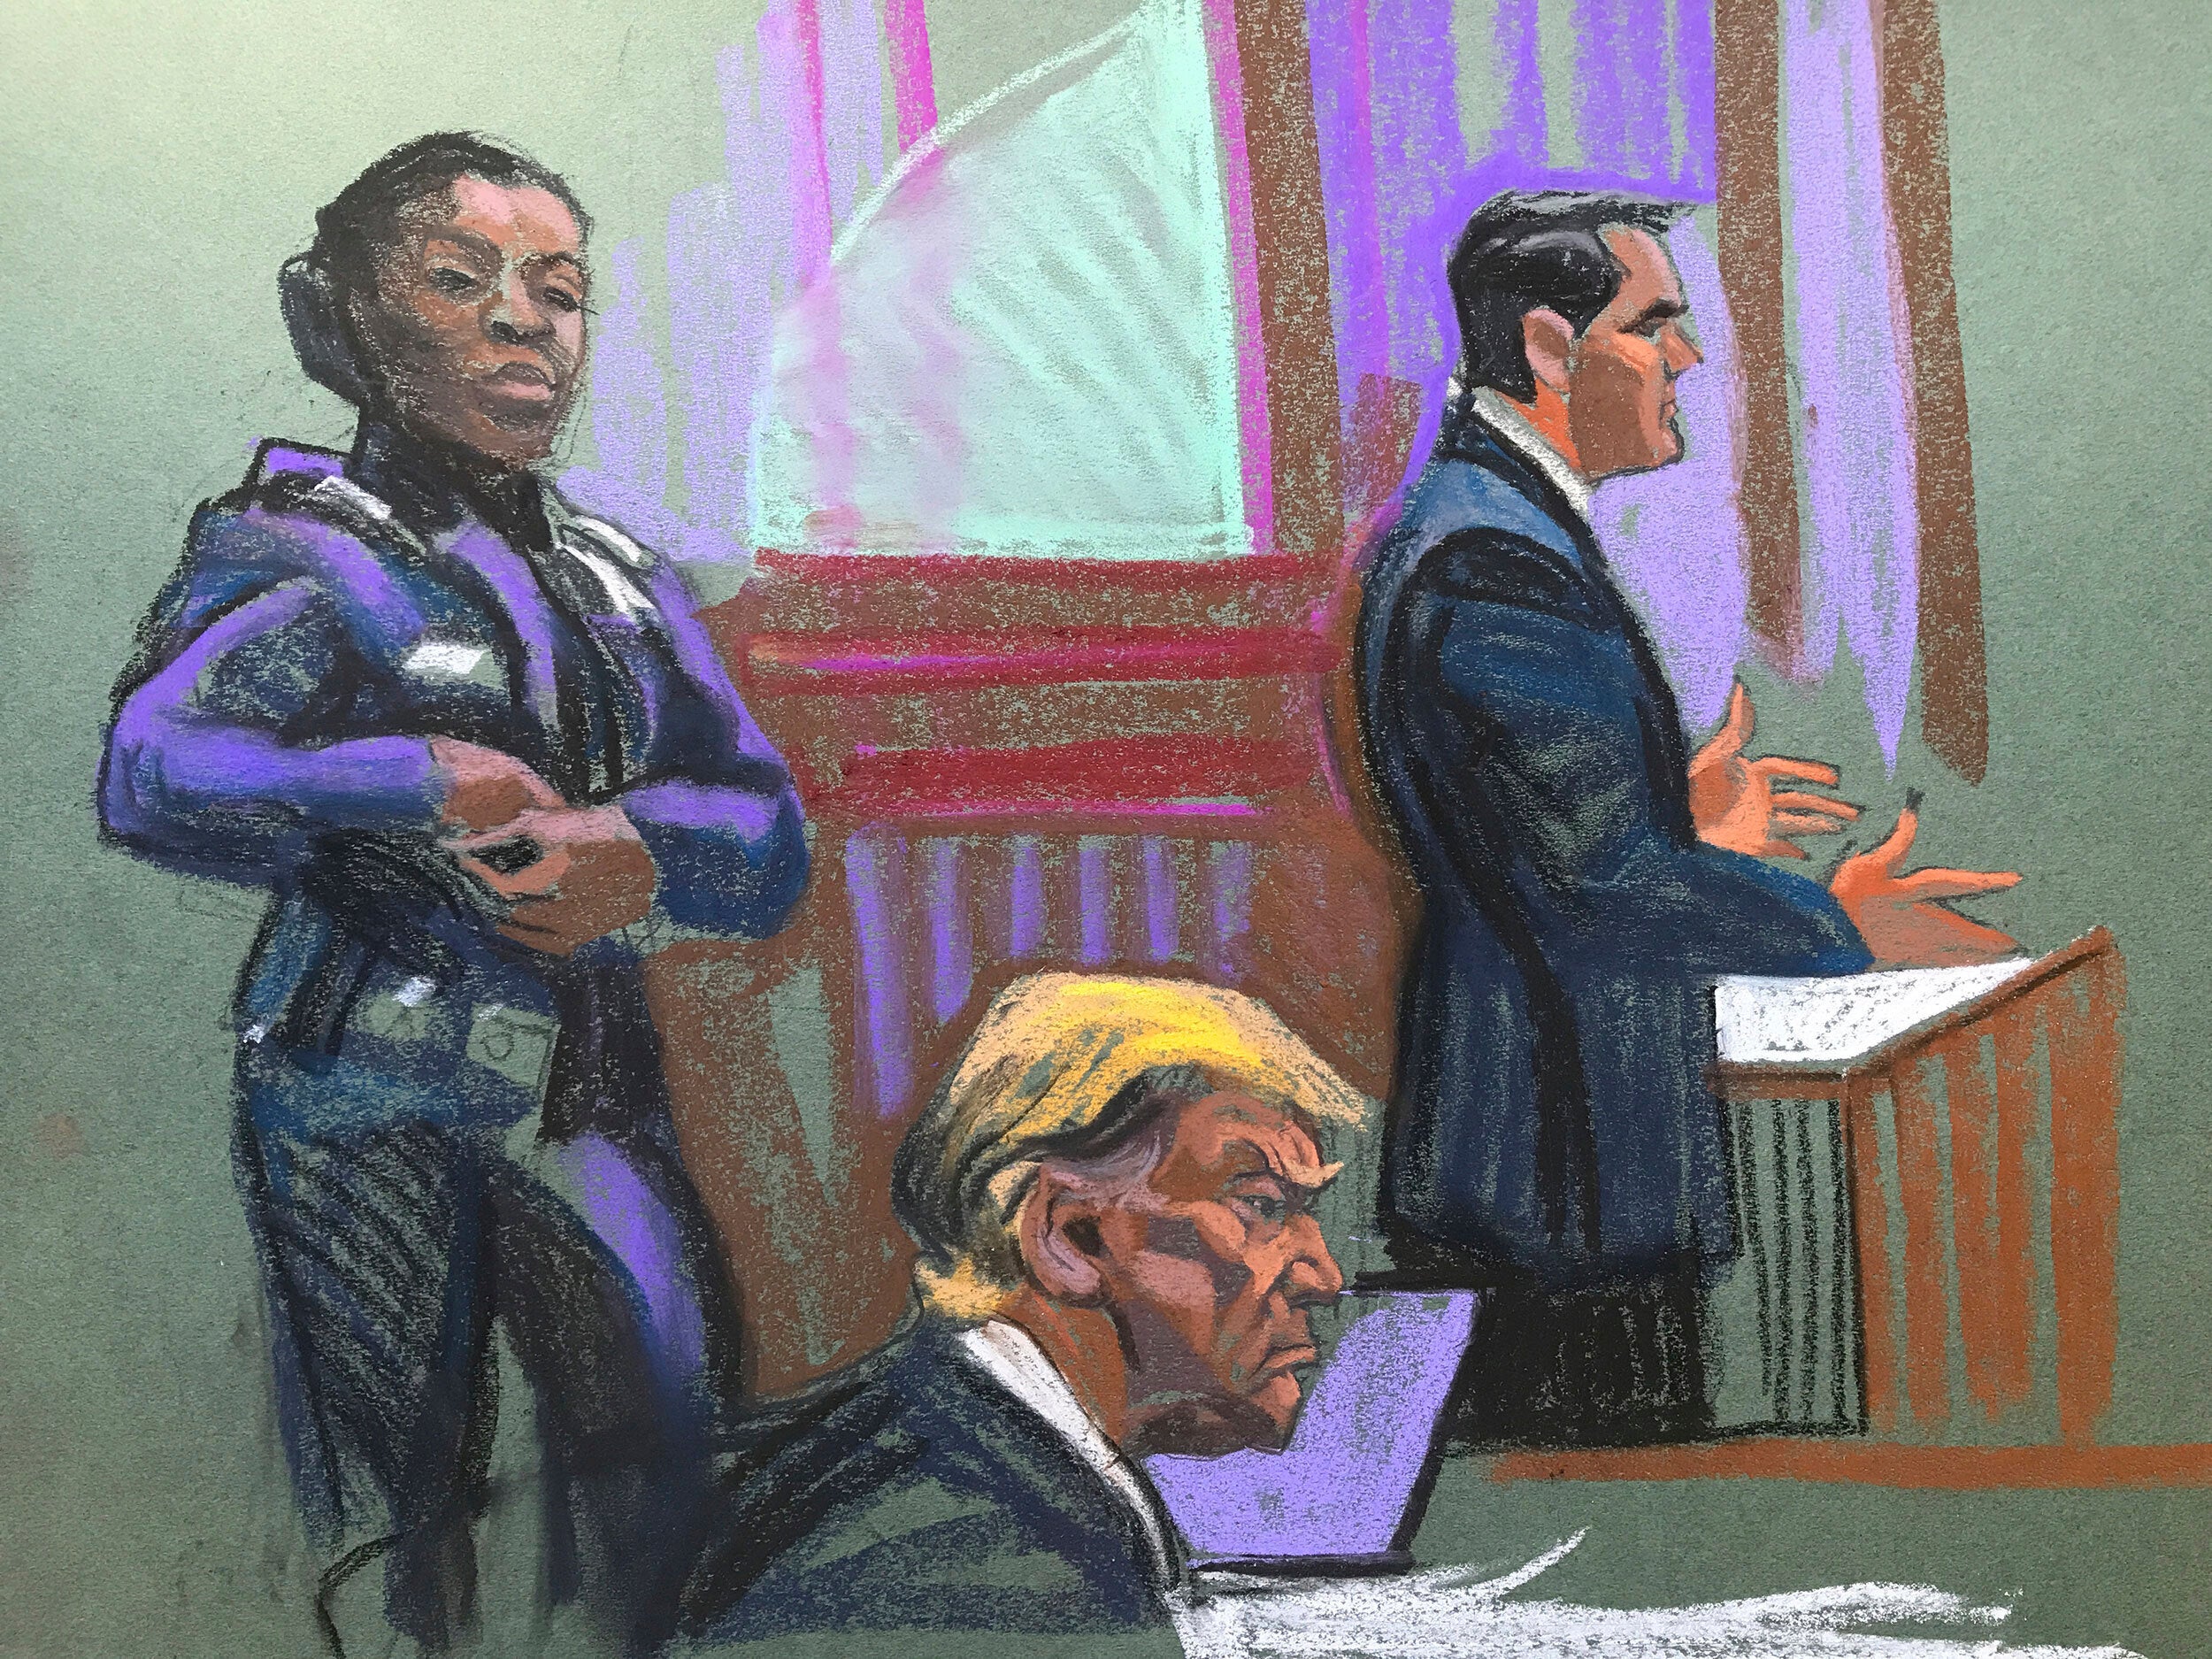 Former US president Donald Trump is seen sitting in this courtroom sketch while his lawyer Todd Blanche stands to speak during the second day of jury selection